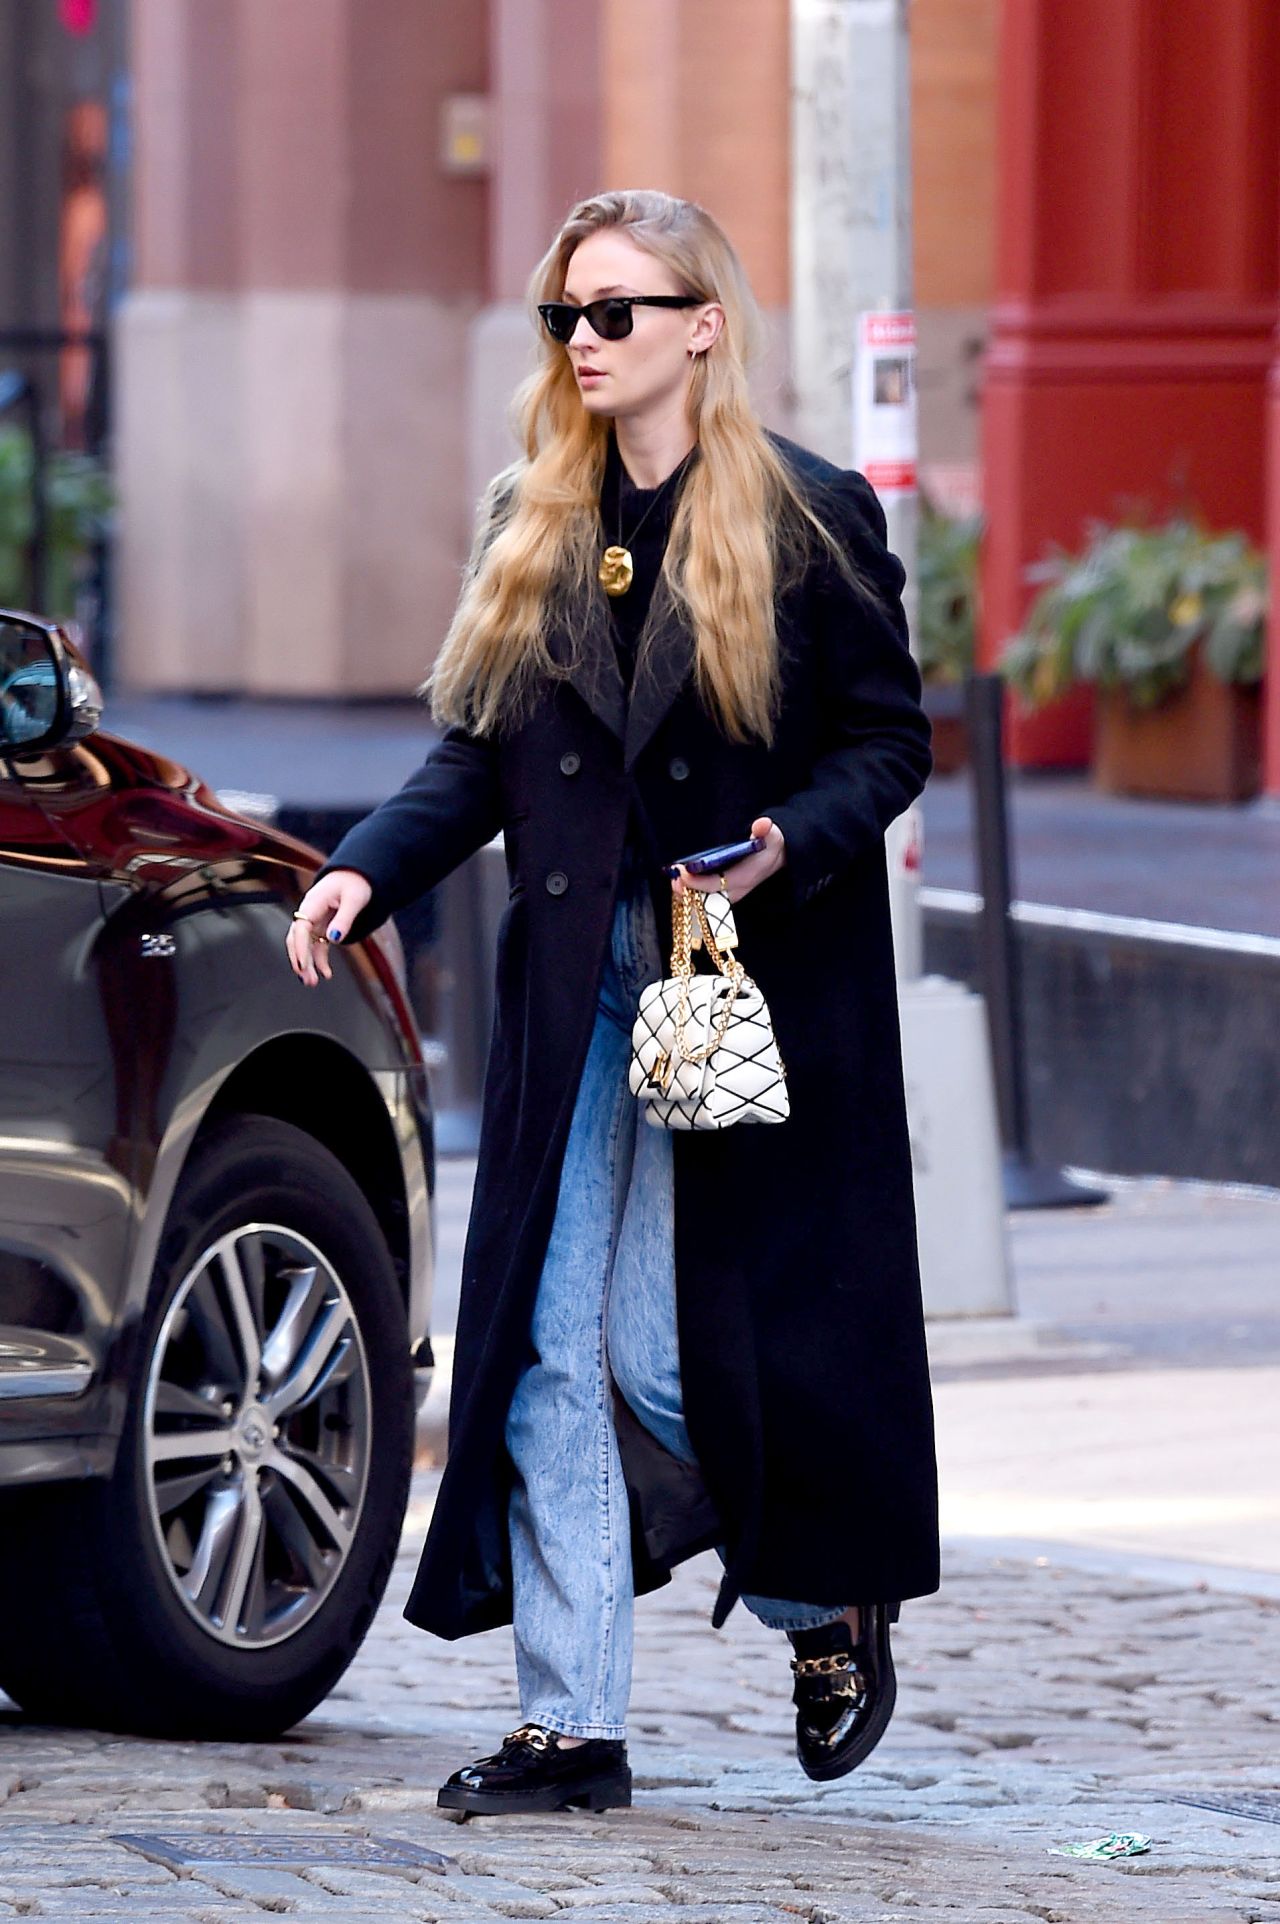 Sophie Turner in a Black Trench Coat, Matching Blouse, Jeans and Black ...